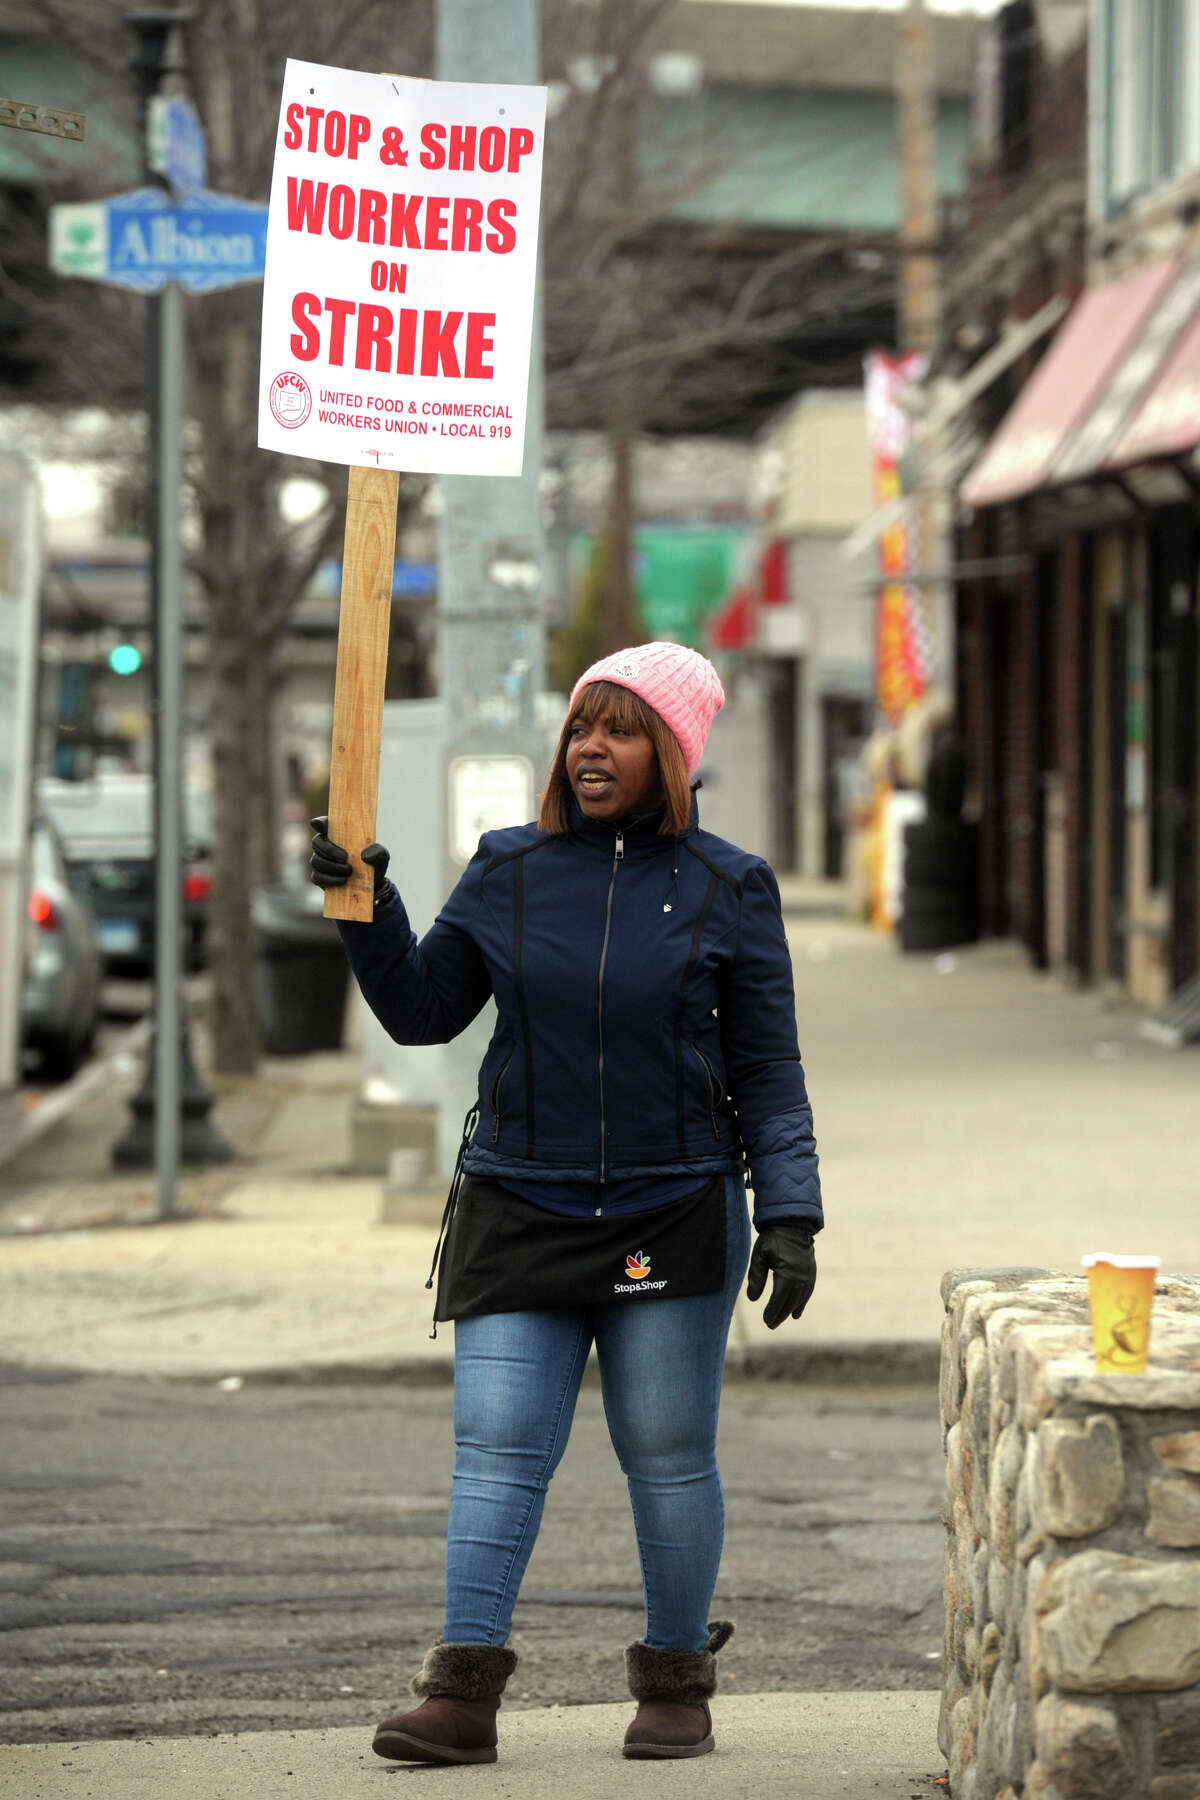 Reasheba McGhie, a pricing clerk at the Stop & Shop on Fairfield Ave., in Bridgeport, Conn. pickets in front of the store after she and her fellow union workers walked out on strike April 11, 2019. Stop & Shop employees across Connecticut and New England walked out on strike Thursday after failing to resolve a contract impasse.